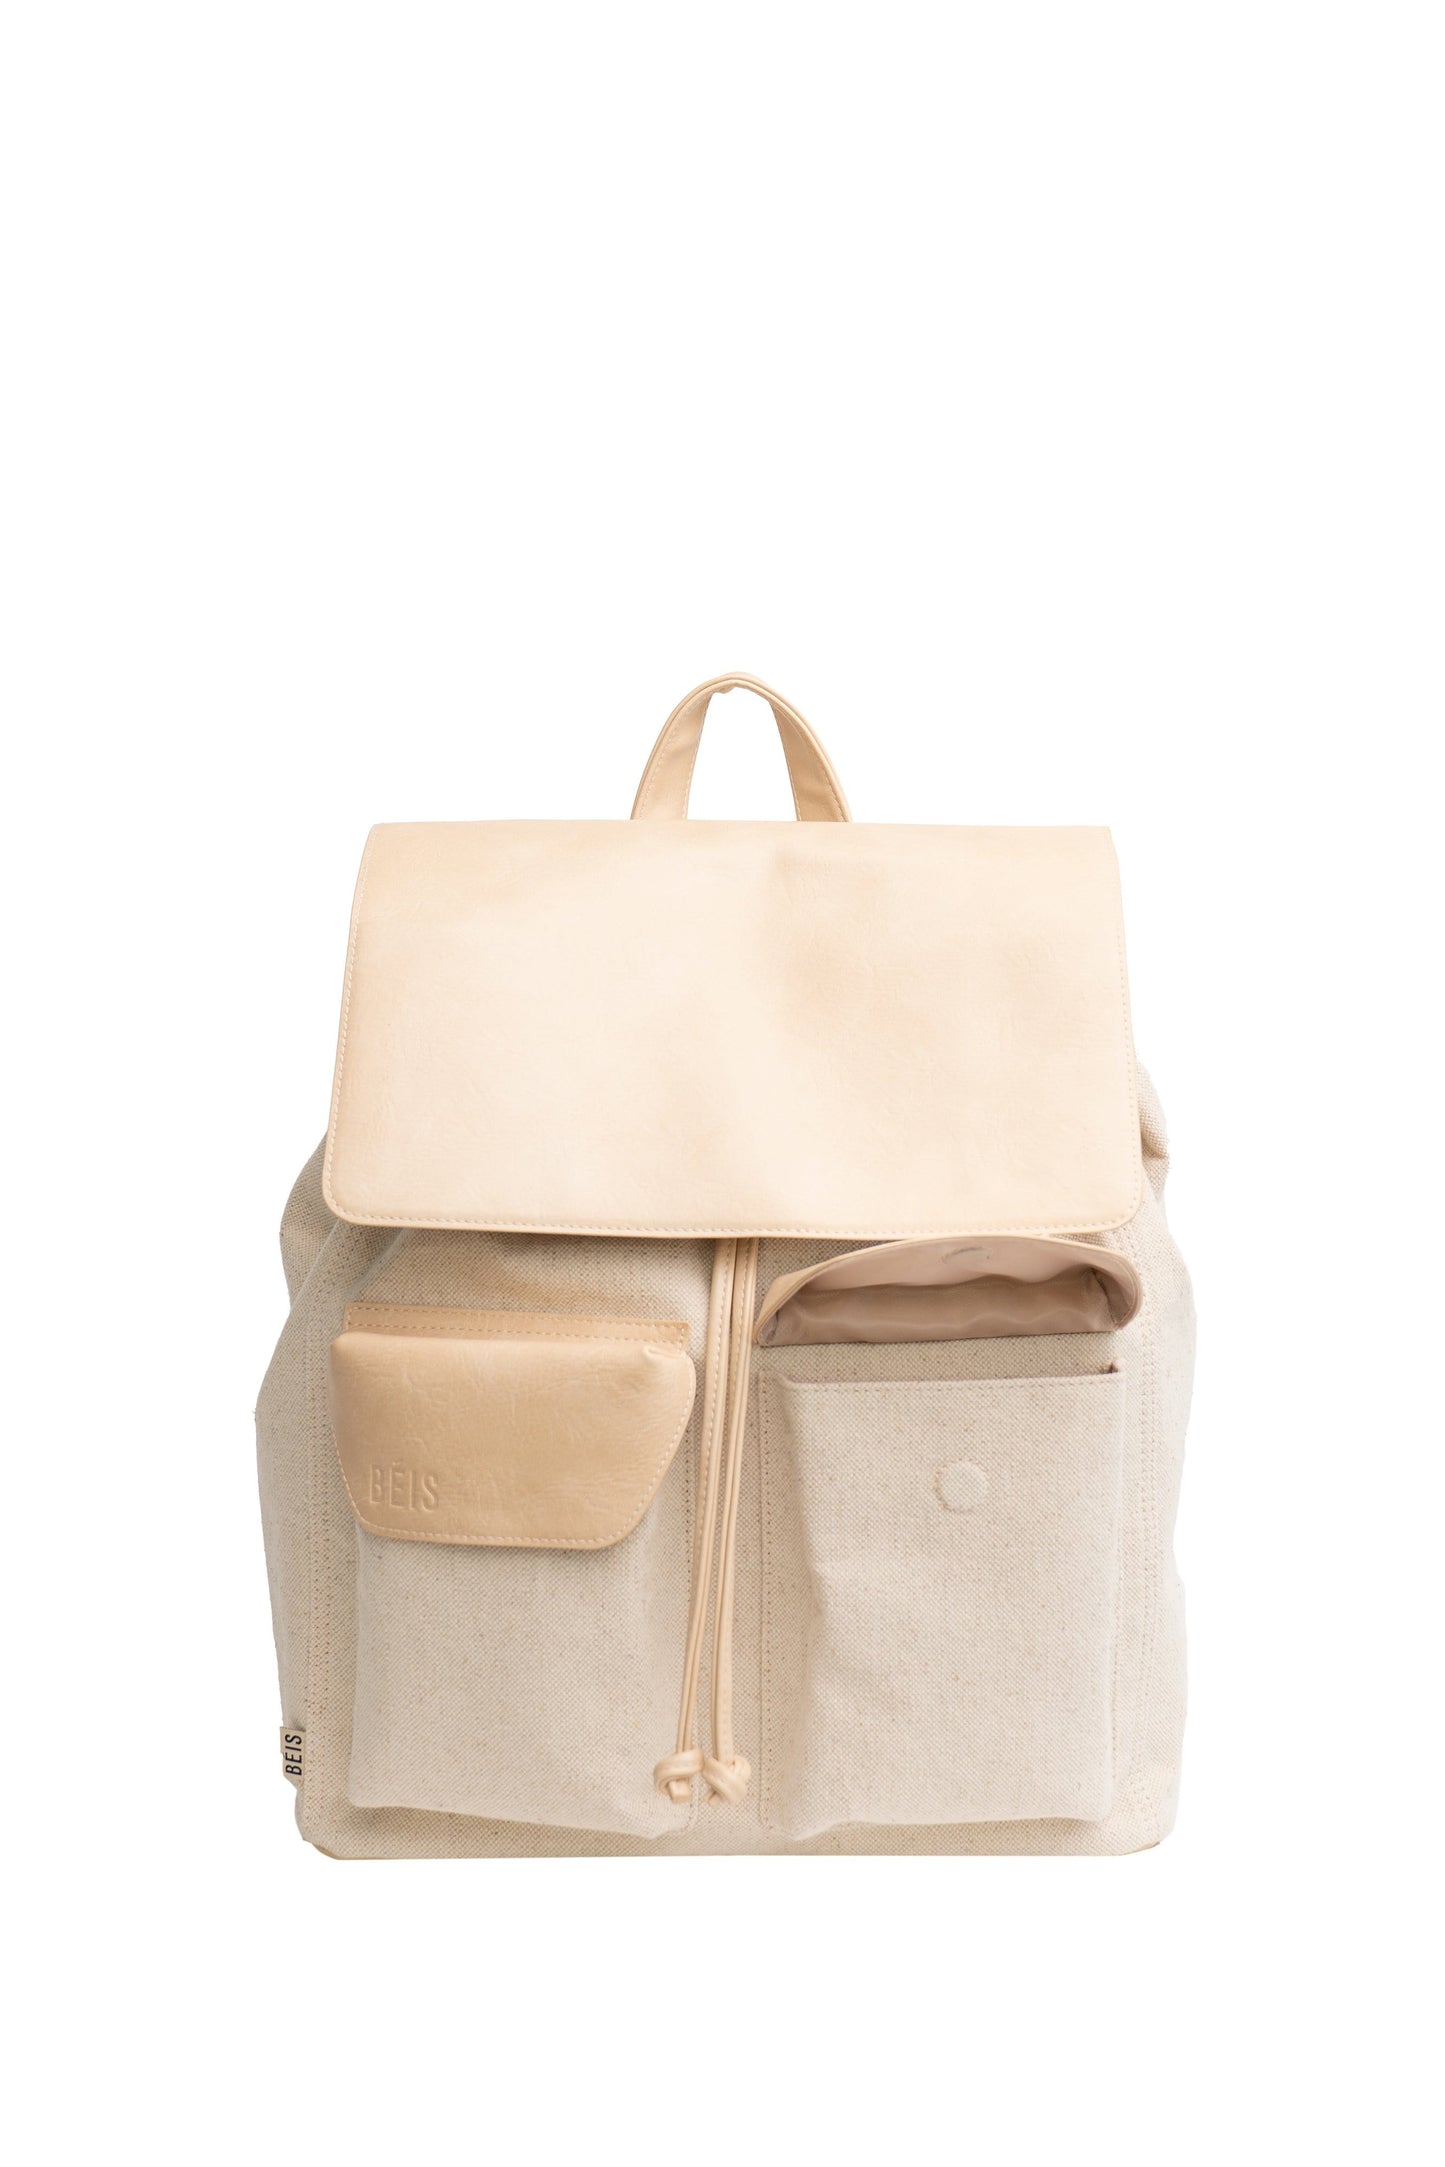 Rucksack in Beige Front with Open Front Pocket